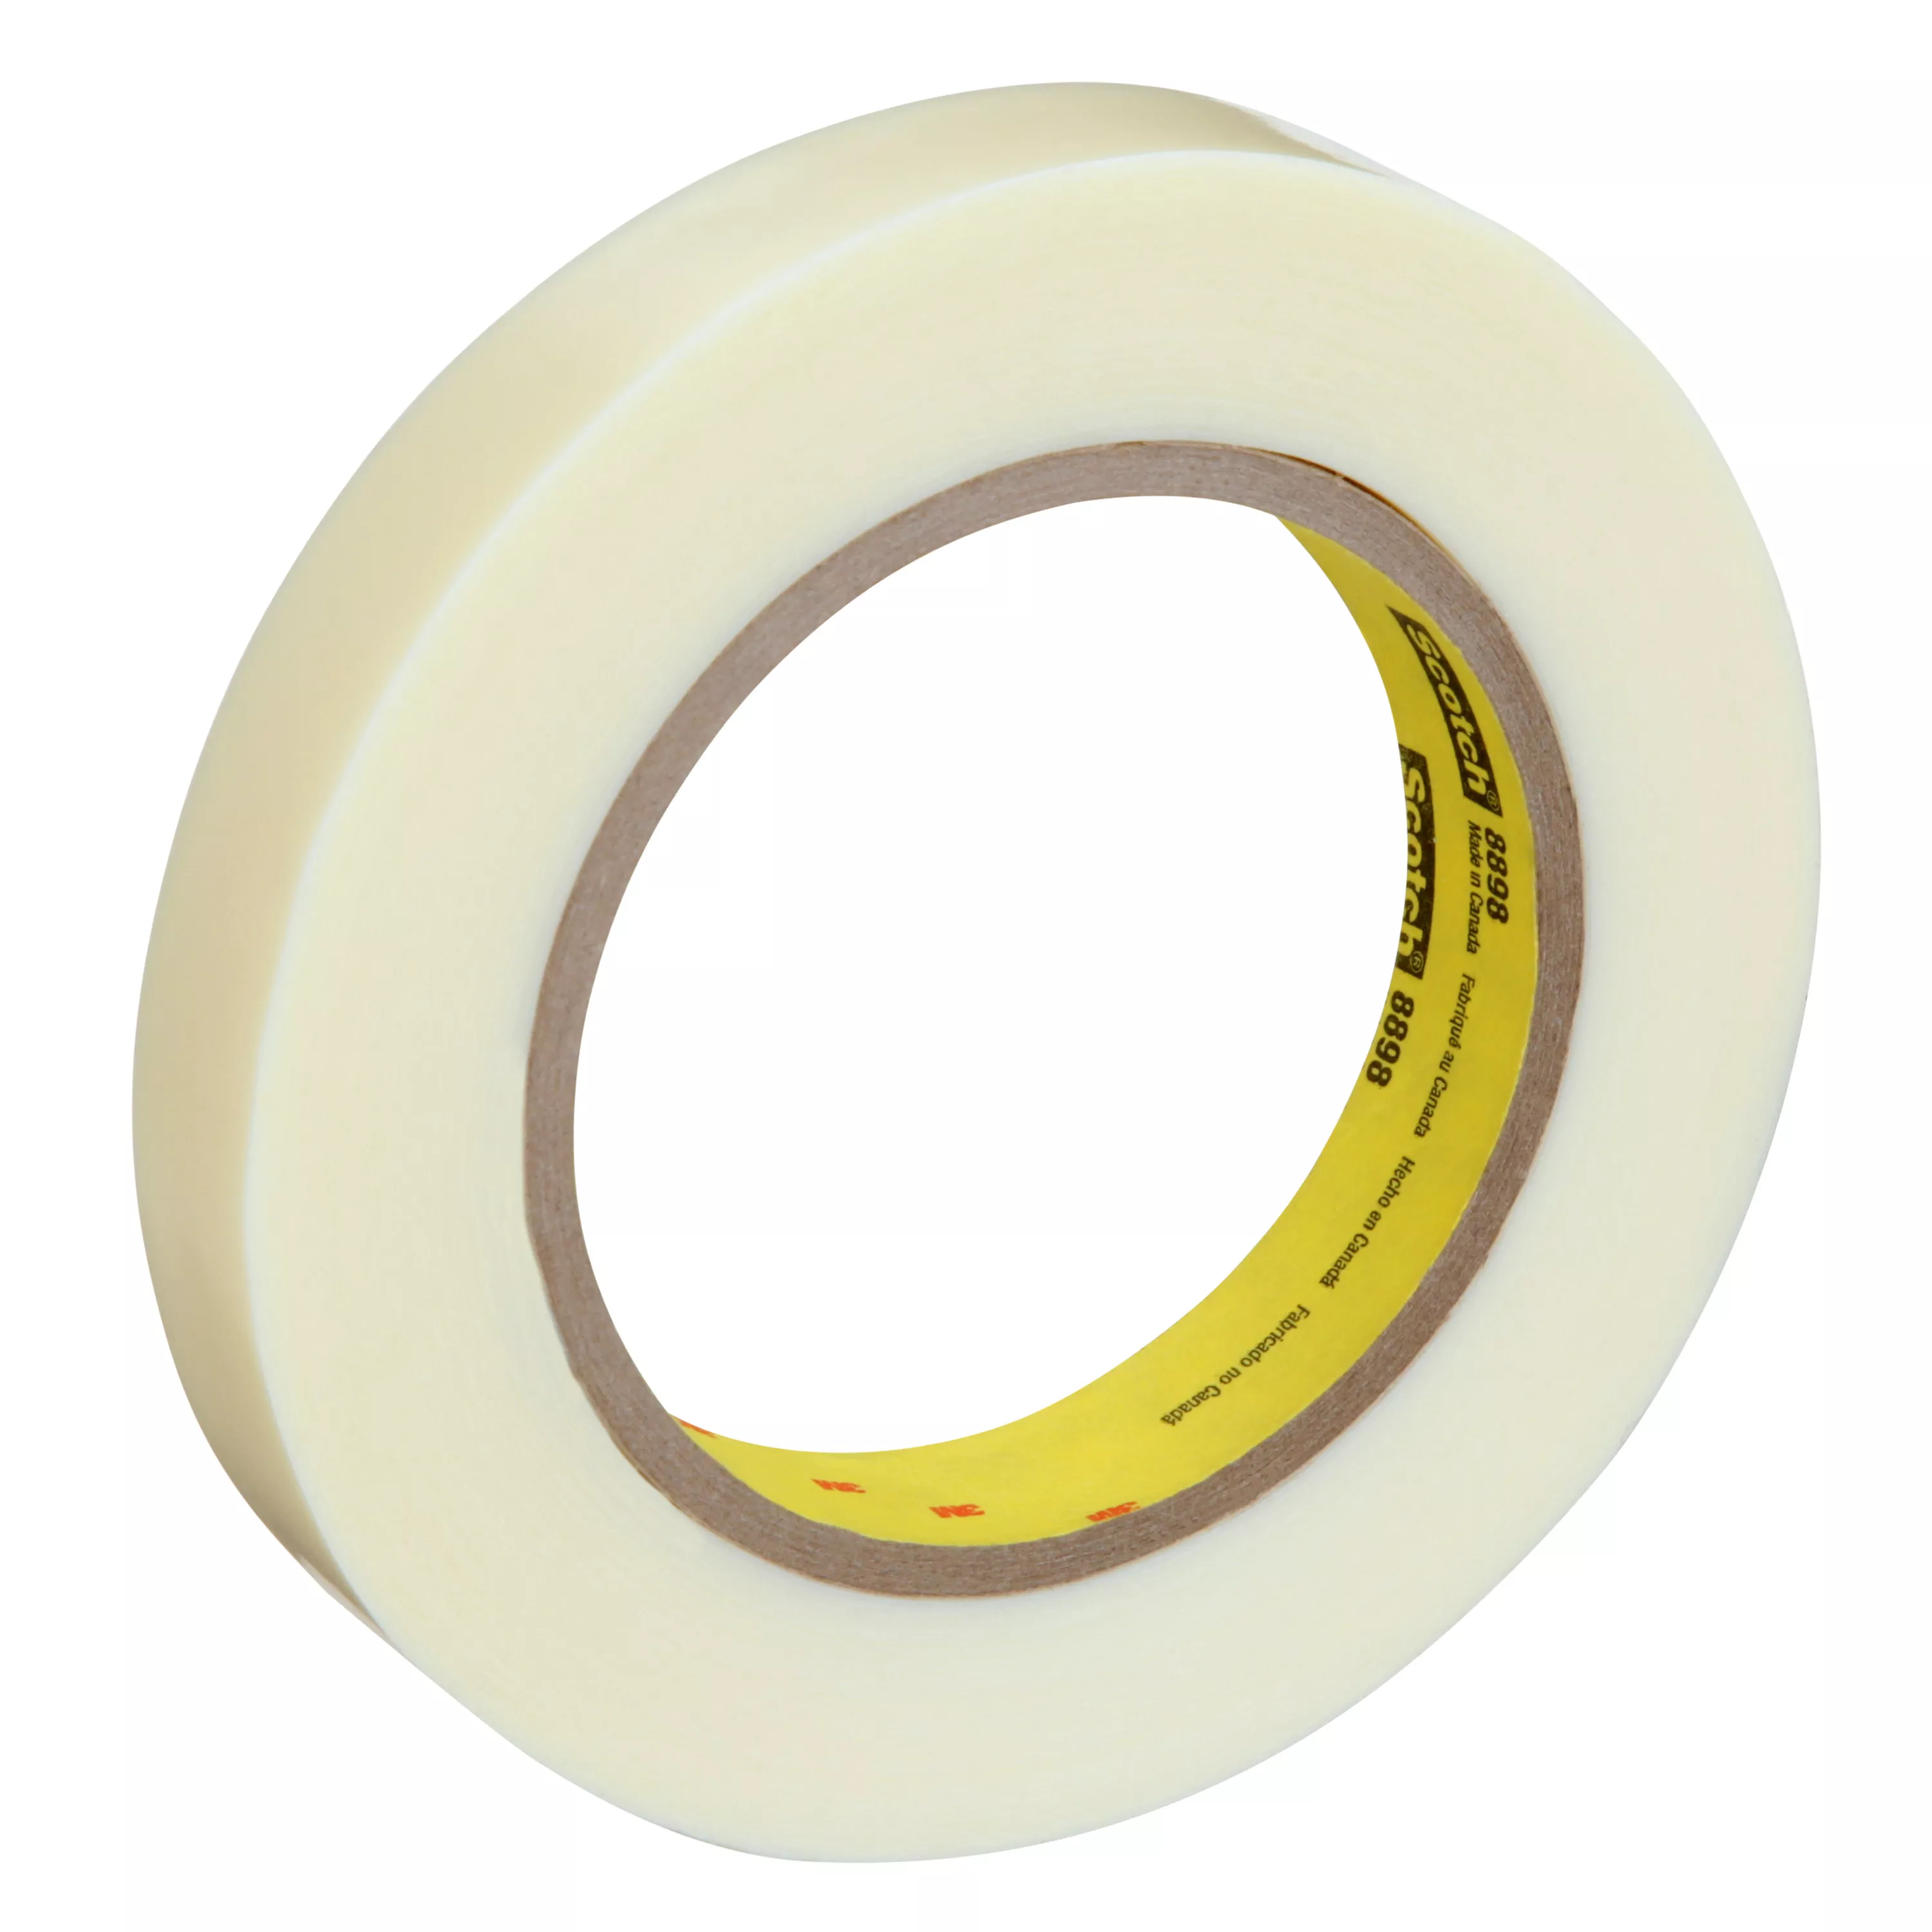 Scotch® Strapping Tape 8898, Ivory, 18 mm x 55 m, 4.6 mil, 48 Roll/Case